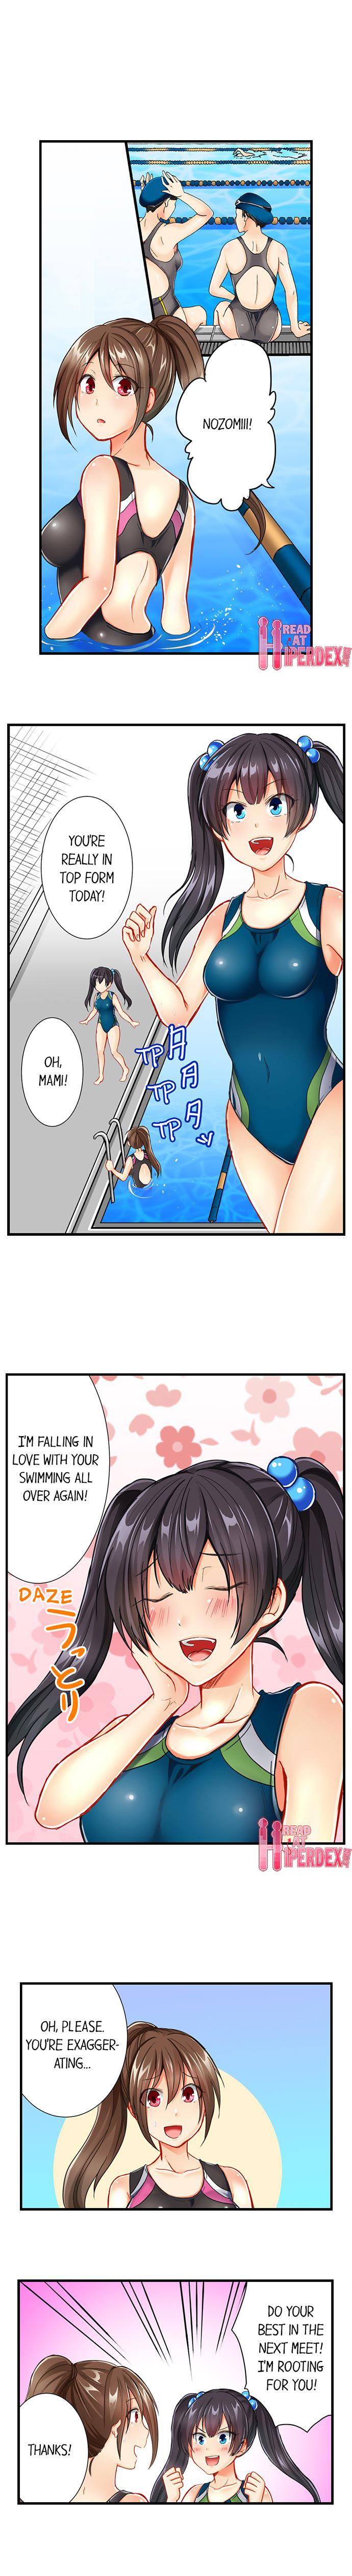 80% of the Swimming Club Girls Are Shaved - Chapter 3 Page 7